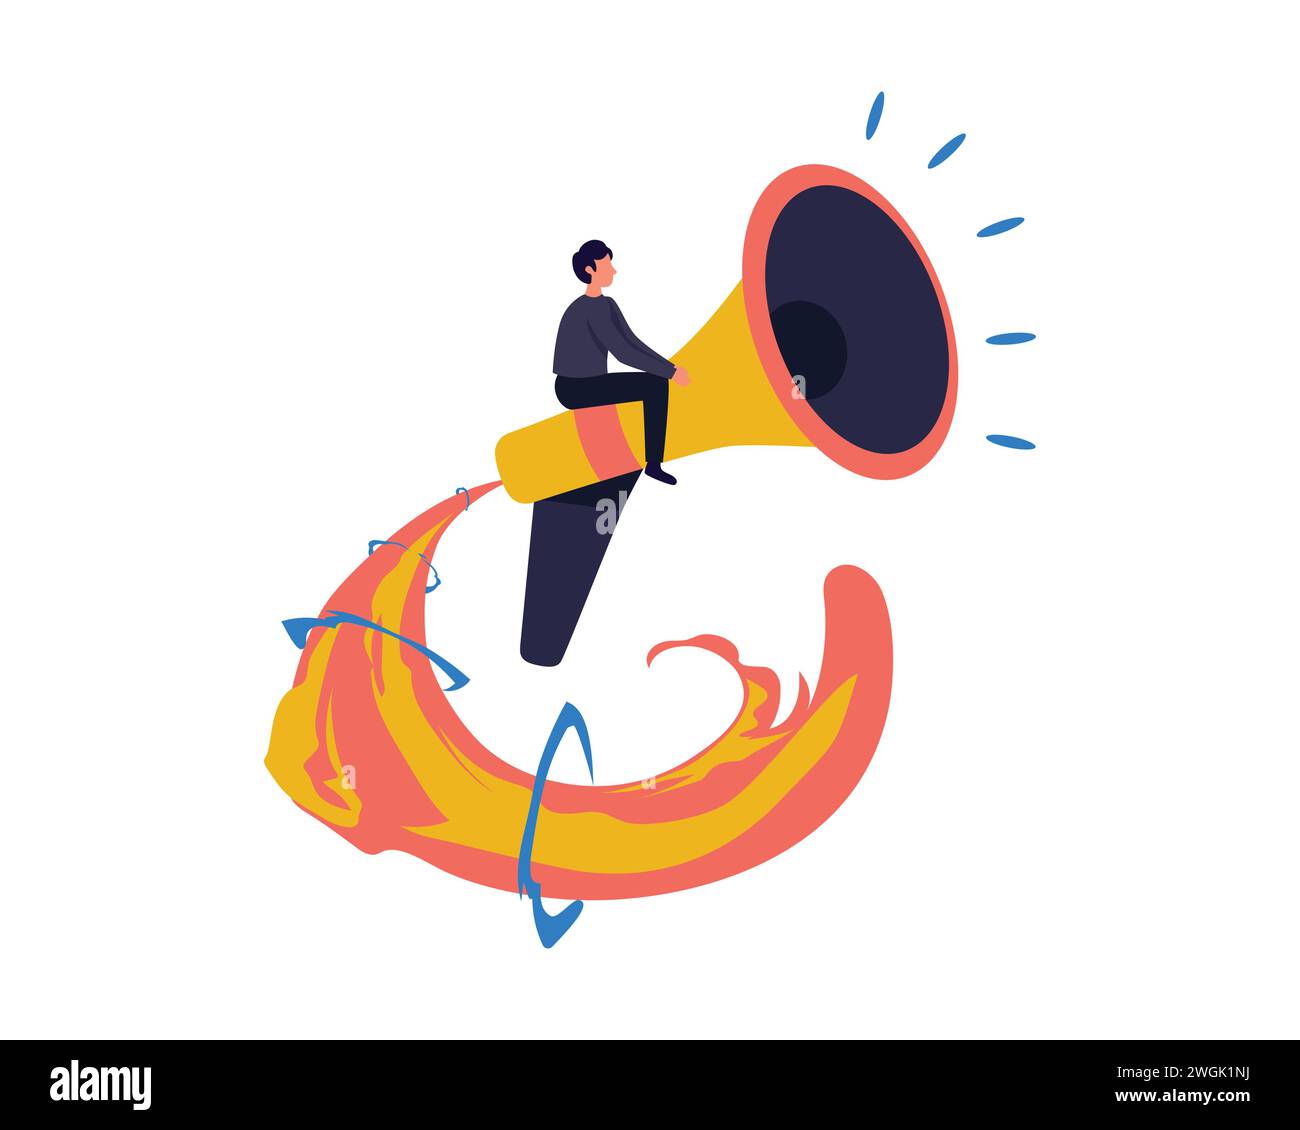 The concept of public relations, refer a friend, share information. illustration of a man riding on a megaphone and using  it to make an announcement. Stock Vector